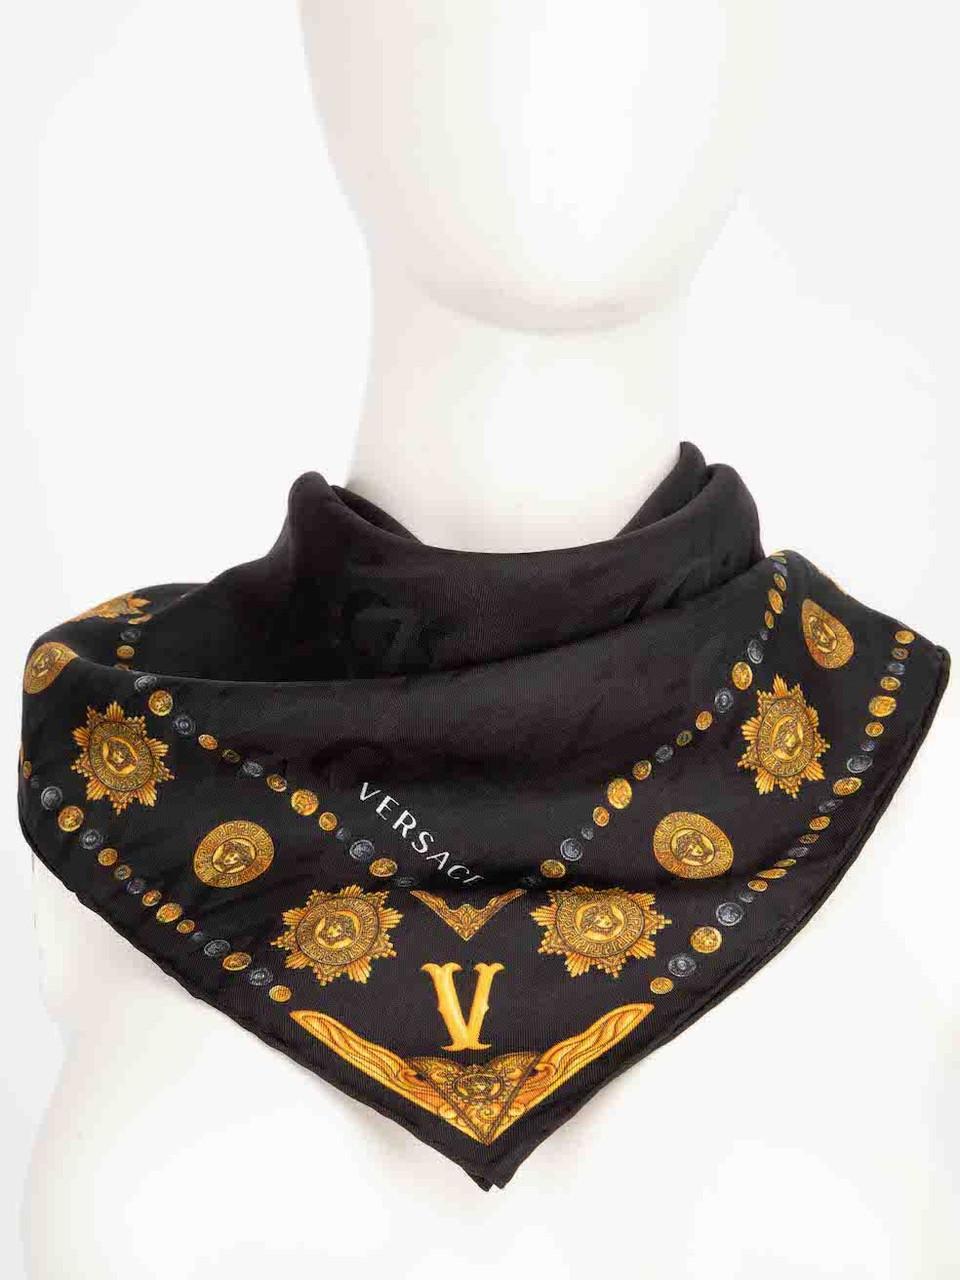 CONDITION is New with tags on this brand new Versace designer item. This item comes with original packaging.
 
 
 
 Details
 
 
 Model: IFO7001
 
 Season: FW23
 
 Black
 
 Silk
 
 Square scarf
 
 Foulard Carre
 
 Gold medusa print
 
 
 
 
 
 Made in